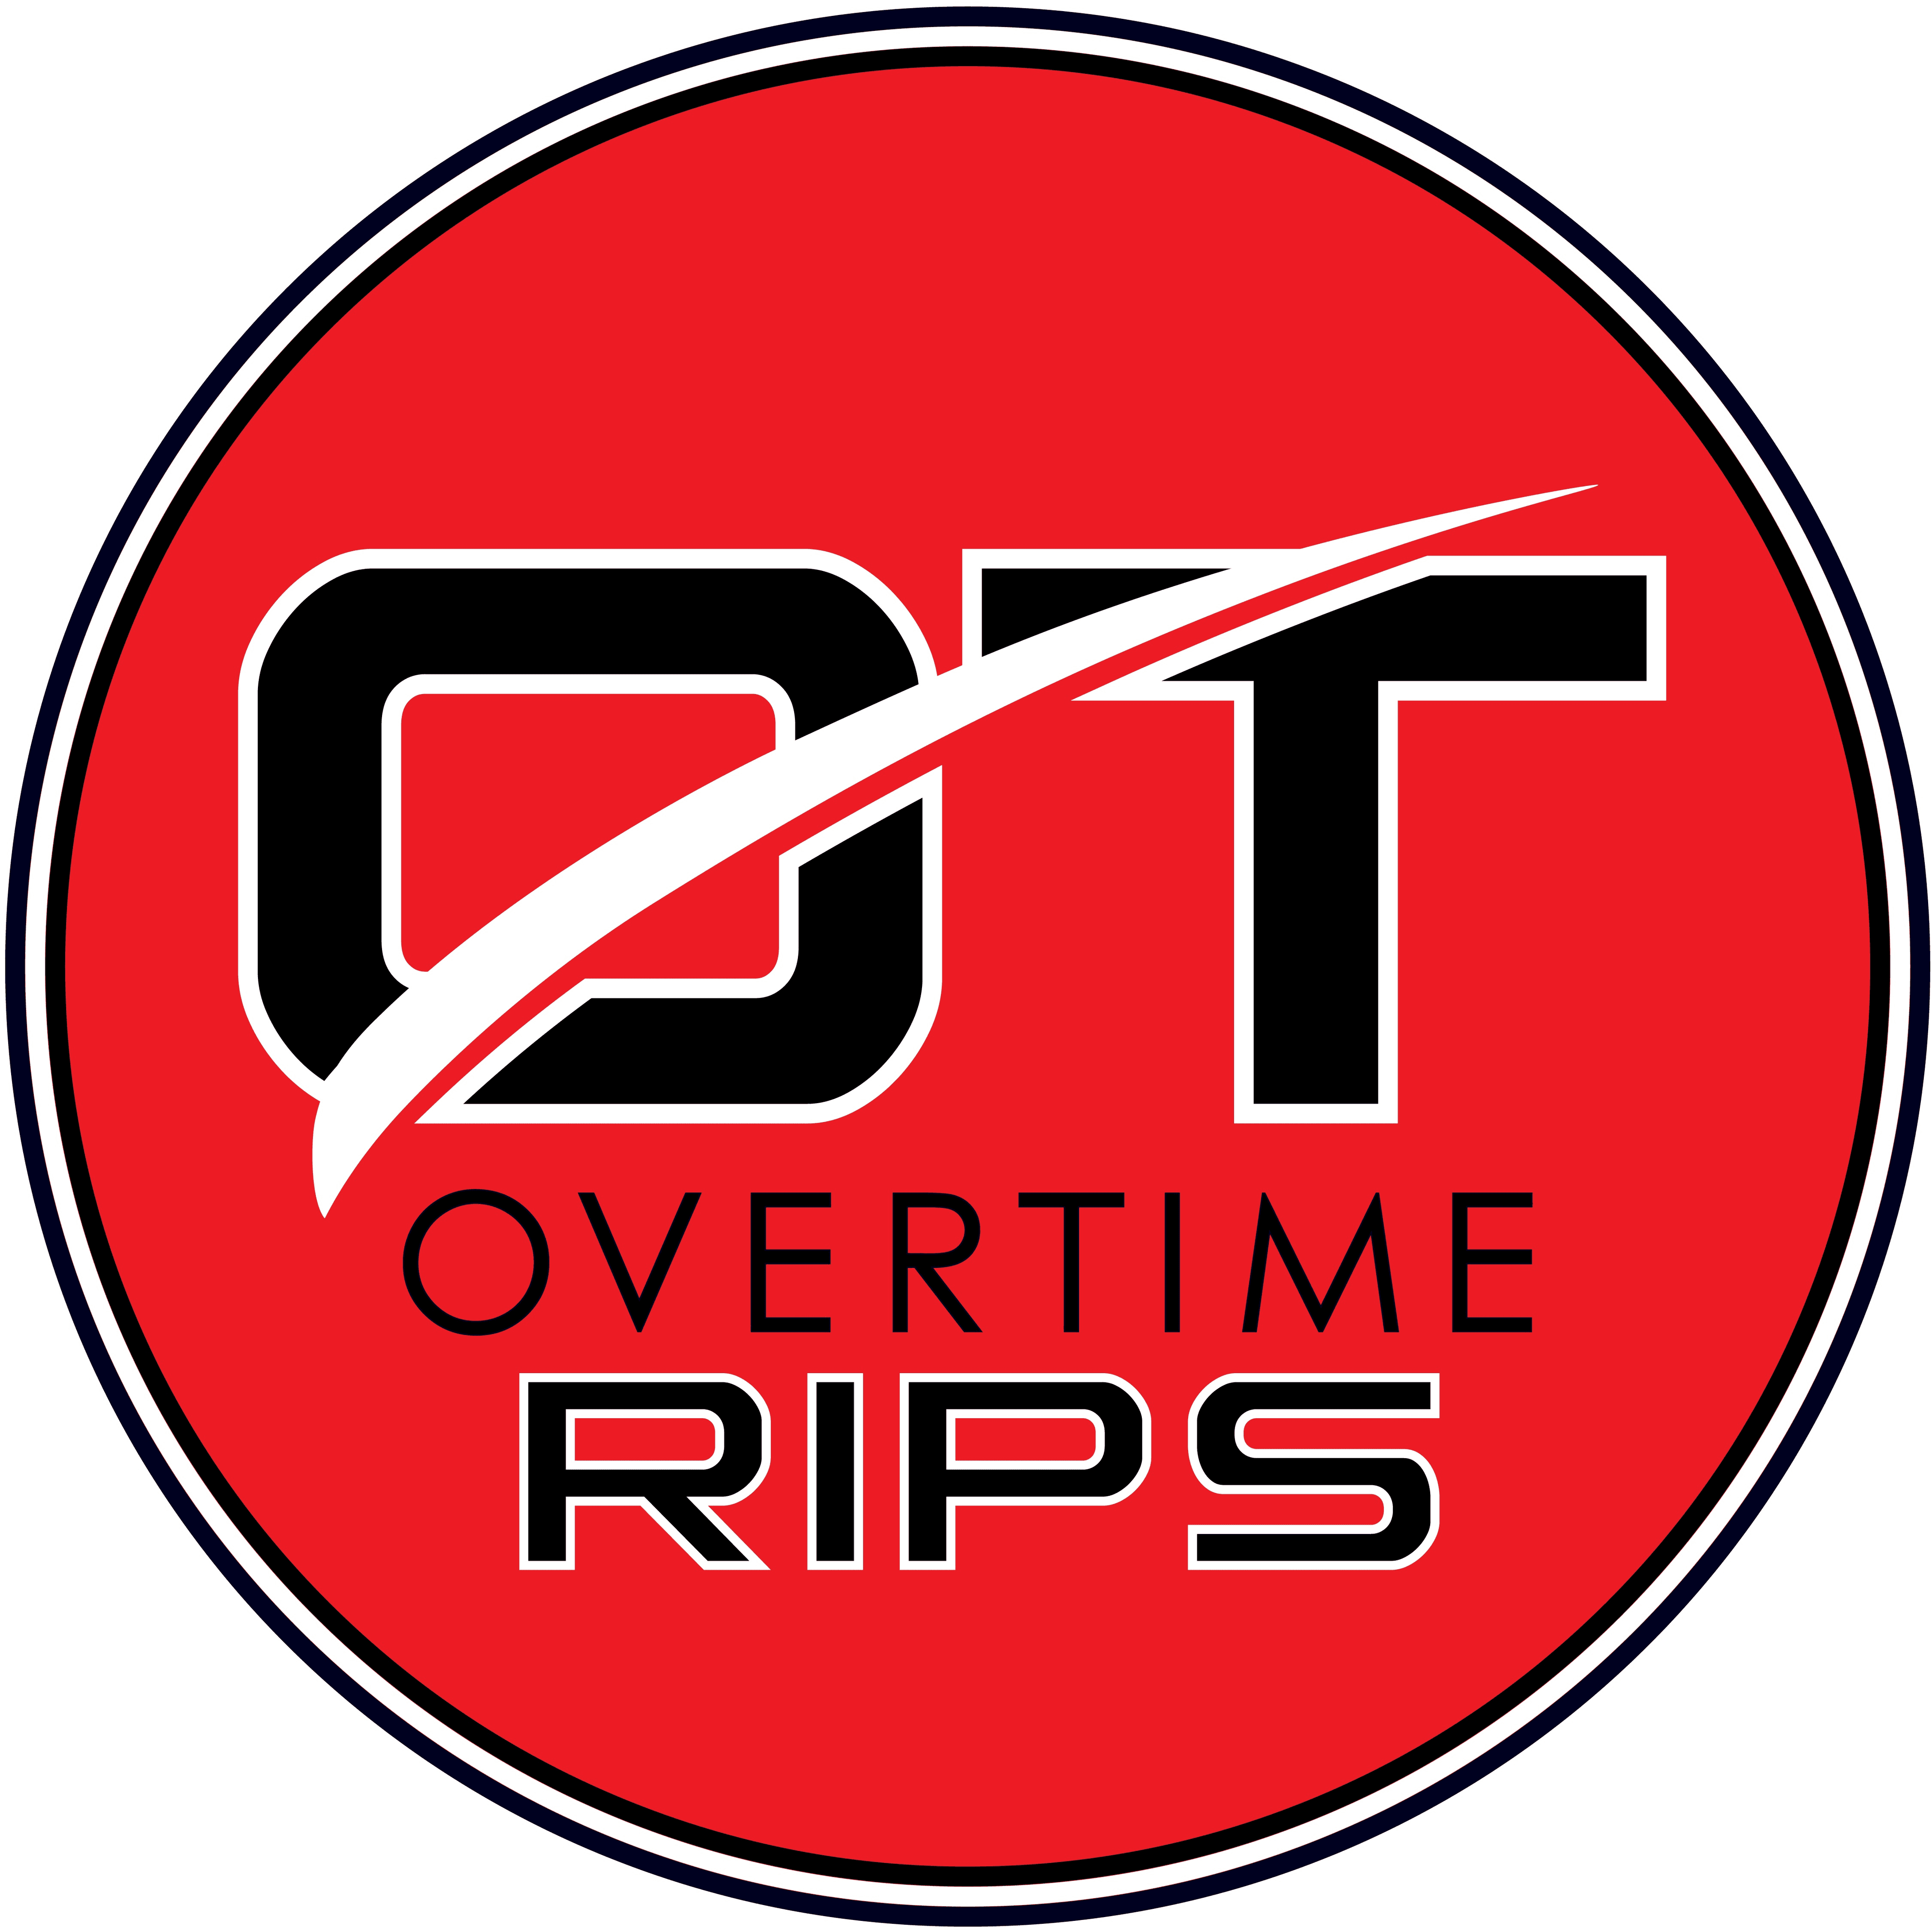 Overtime_Crypts 横幅